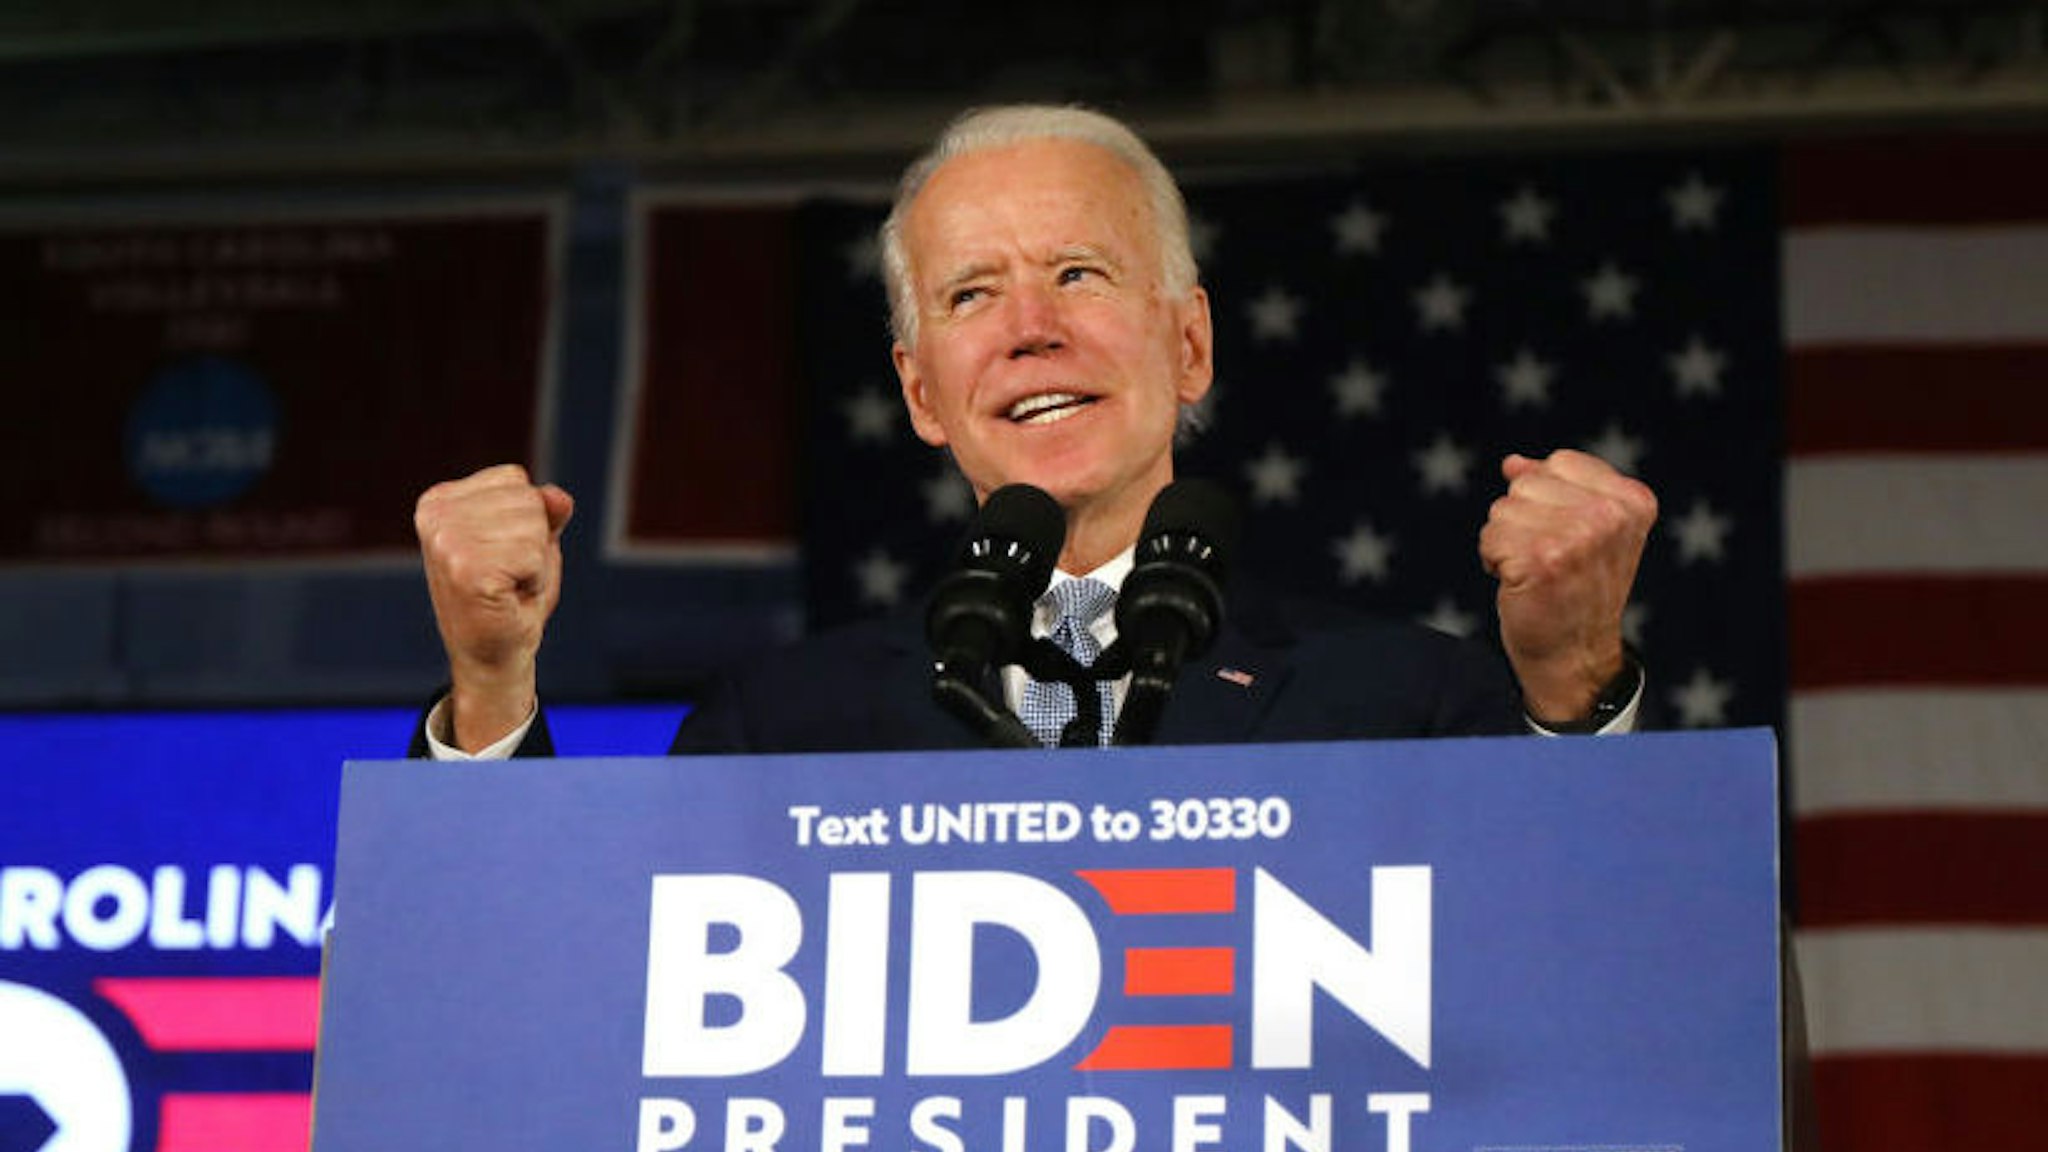 COLUMBIA, SOUTH CAROLINA - FEBRUARY 29: Democratic presidential candidate former Vice President Joe Biden reacts on stage with his wife Jill Biden after declaring victory in the South Carolina presidential primary on February 29, 2020 in Columbia, South Carolina. South Carolina is the first-in-the-south primary and the fourth state in the presidential nominating process.